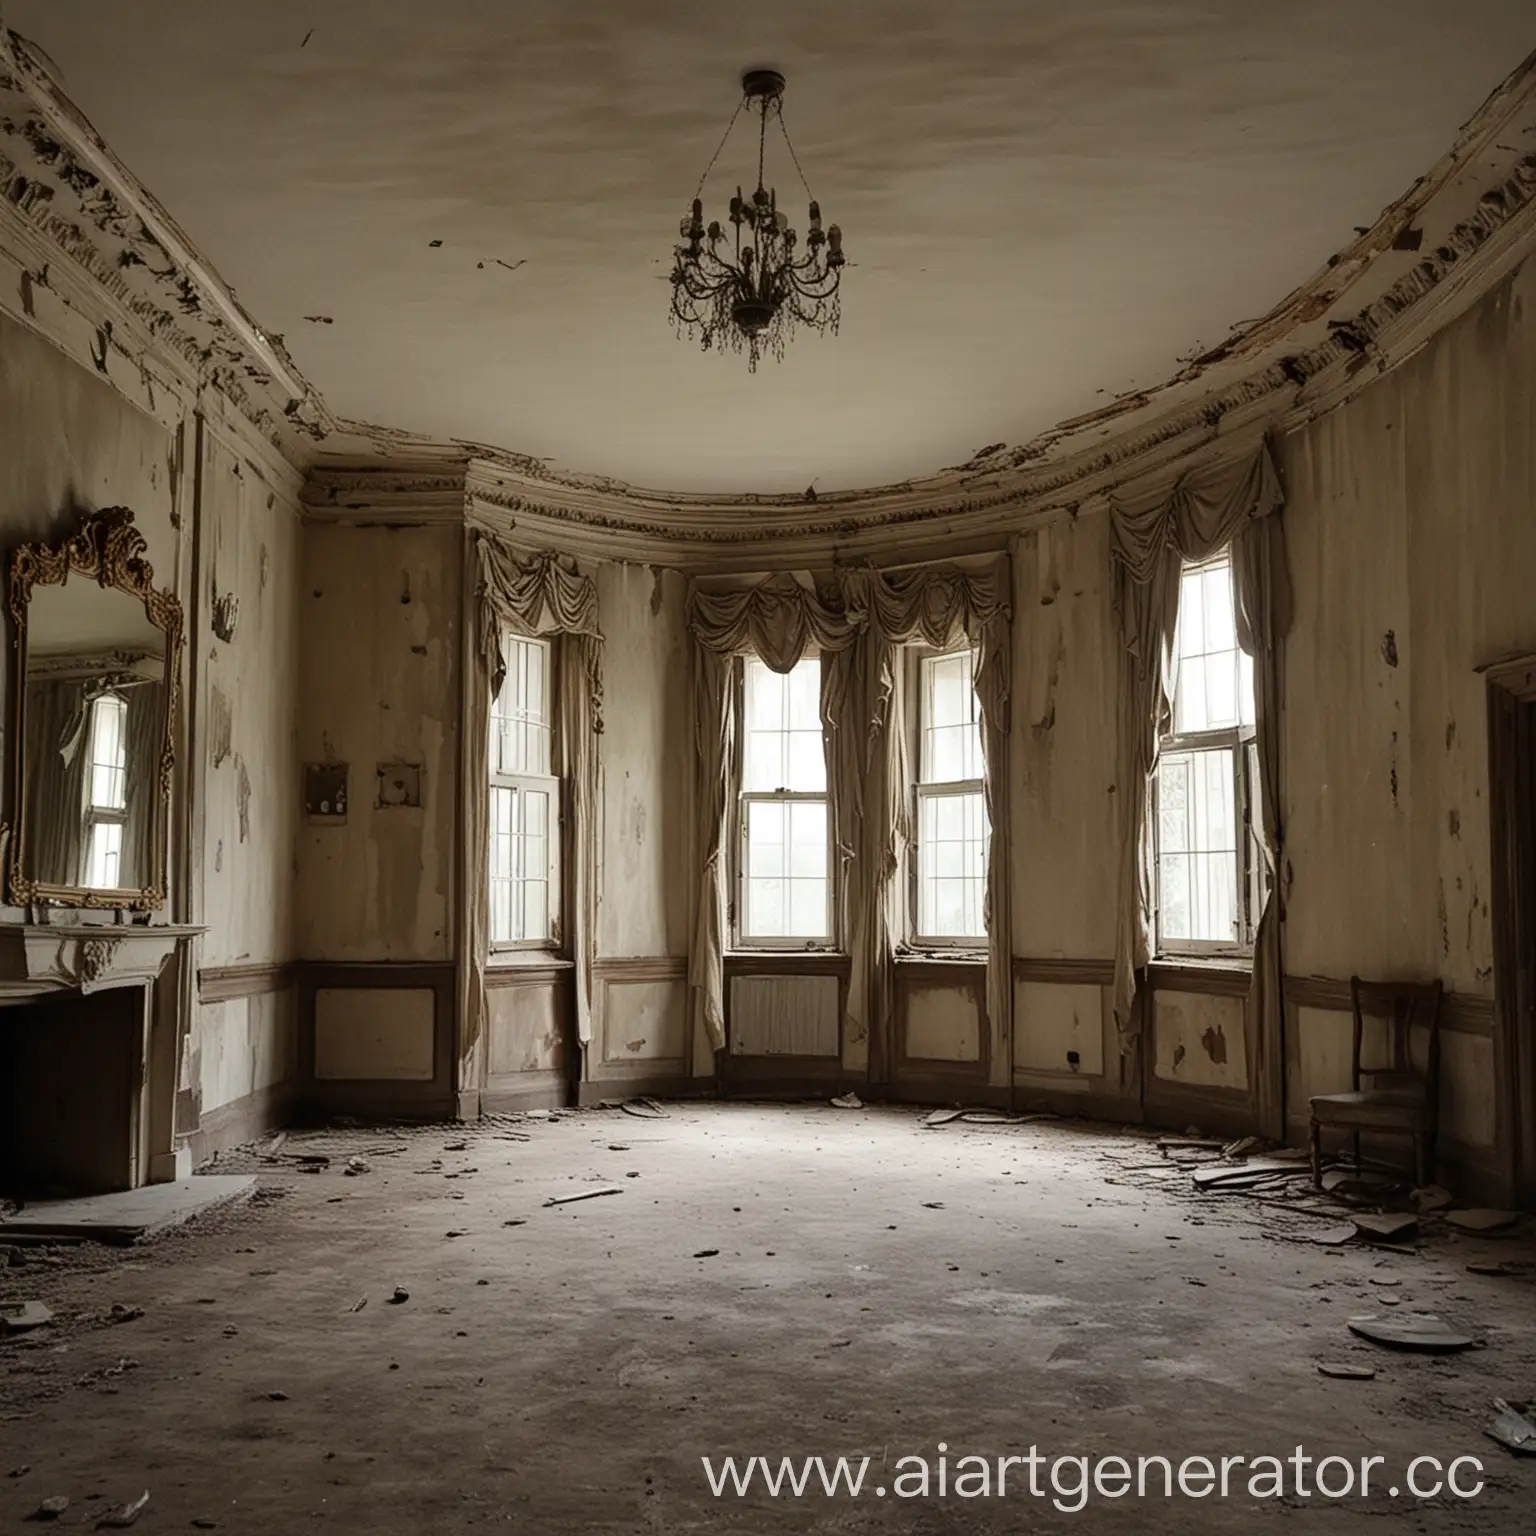 Interior-of-an-Abandoned-Victorian-Mansion